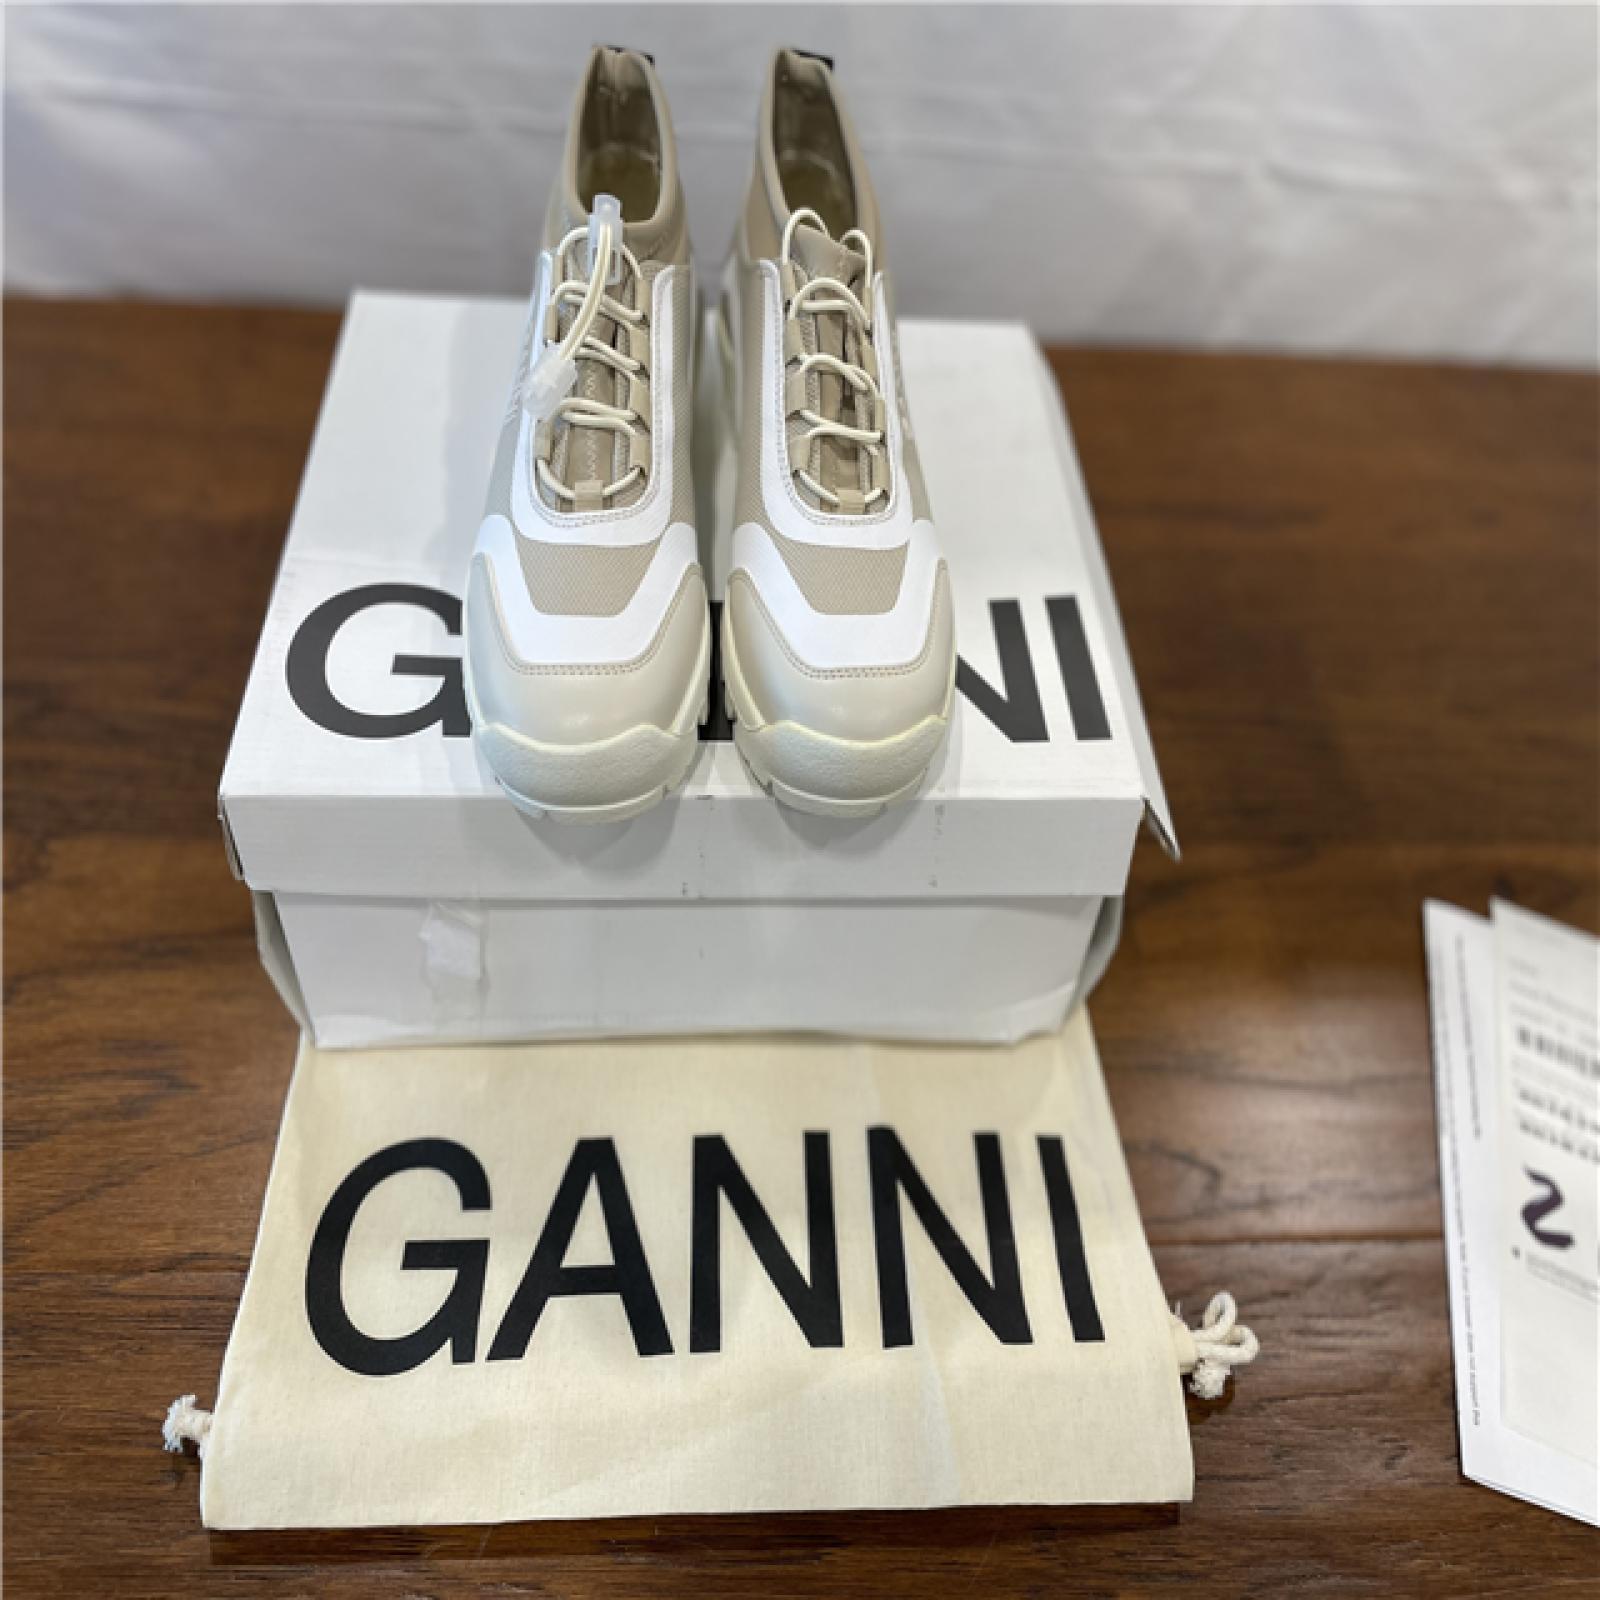 NEW! GANNI Performance Neoprene Sneakers in White Responsible Size 3 Recycled Polyester Women's